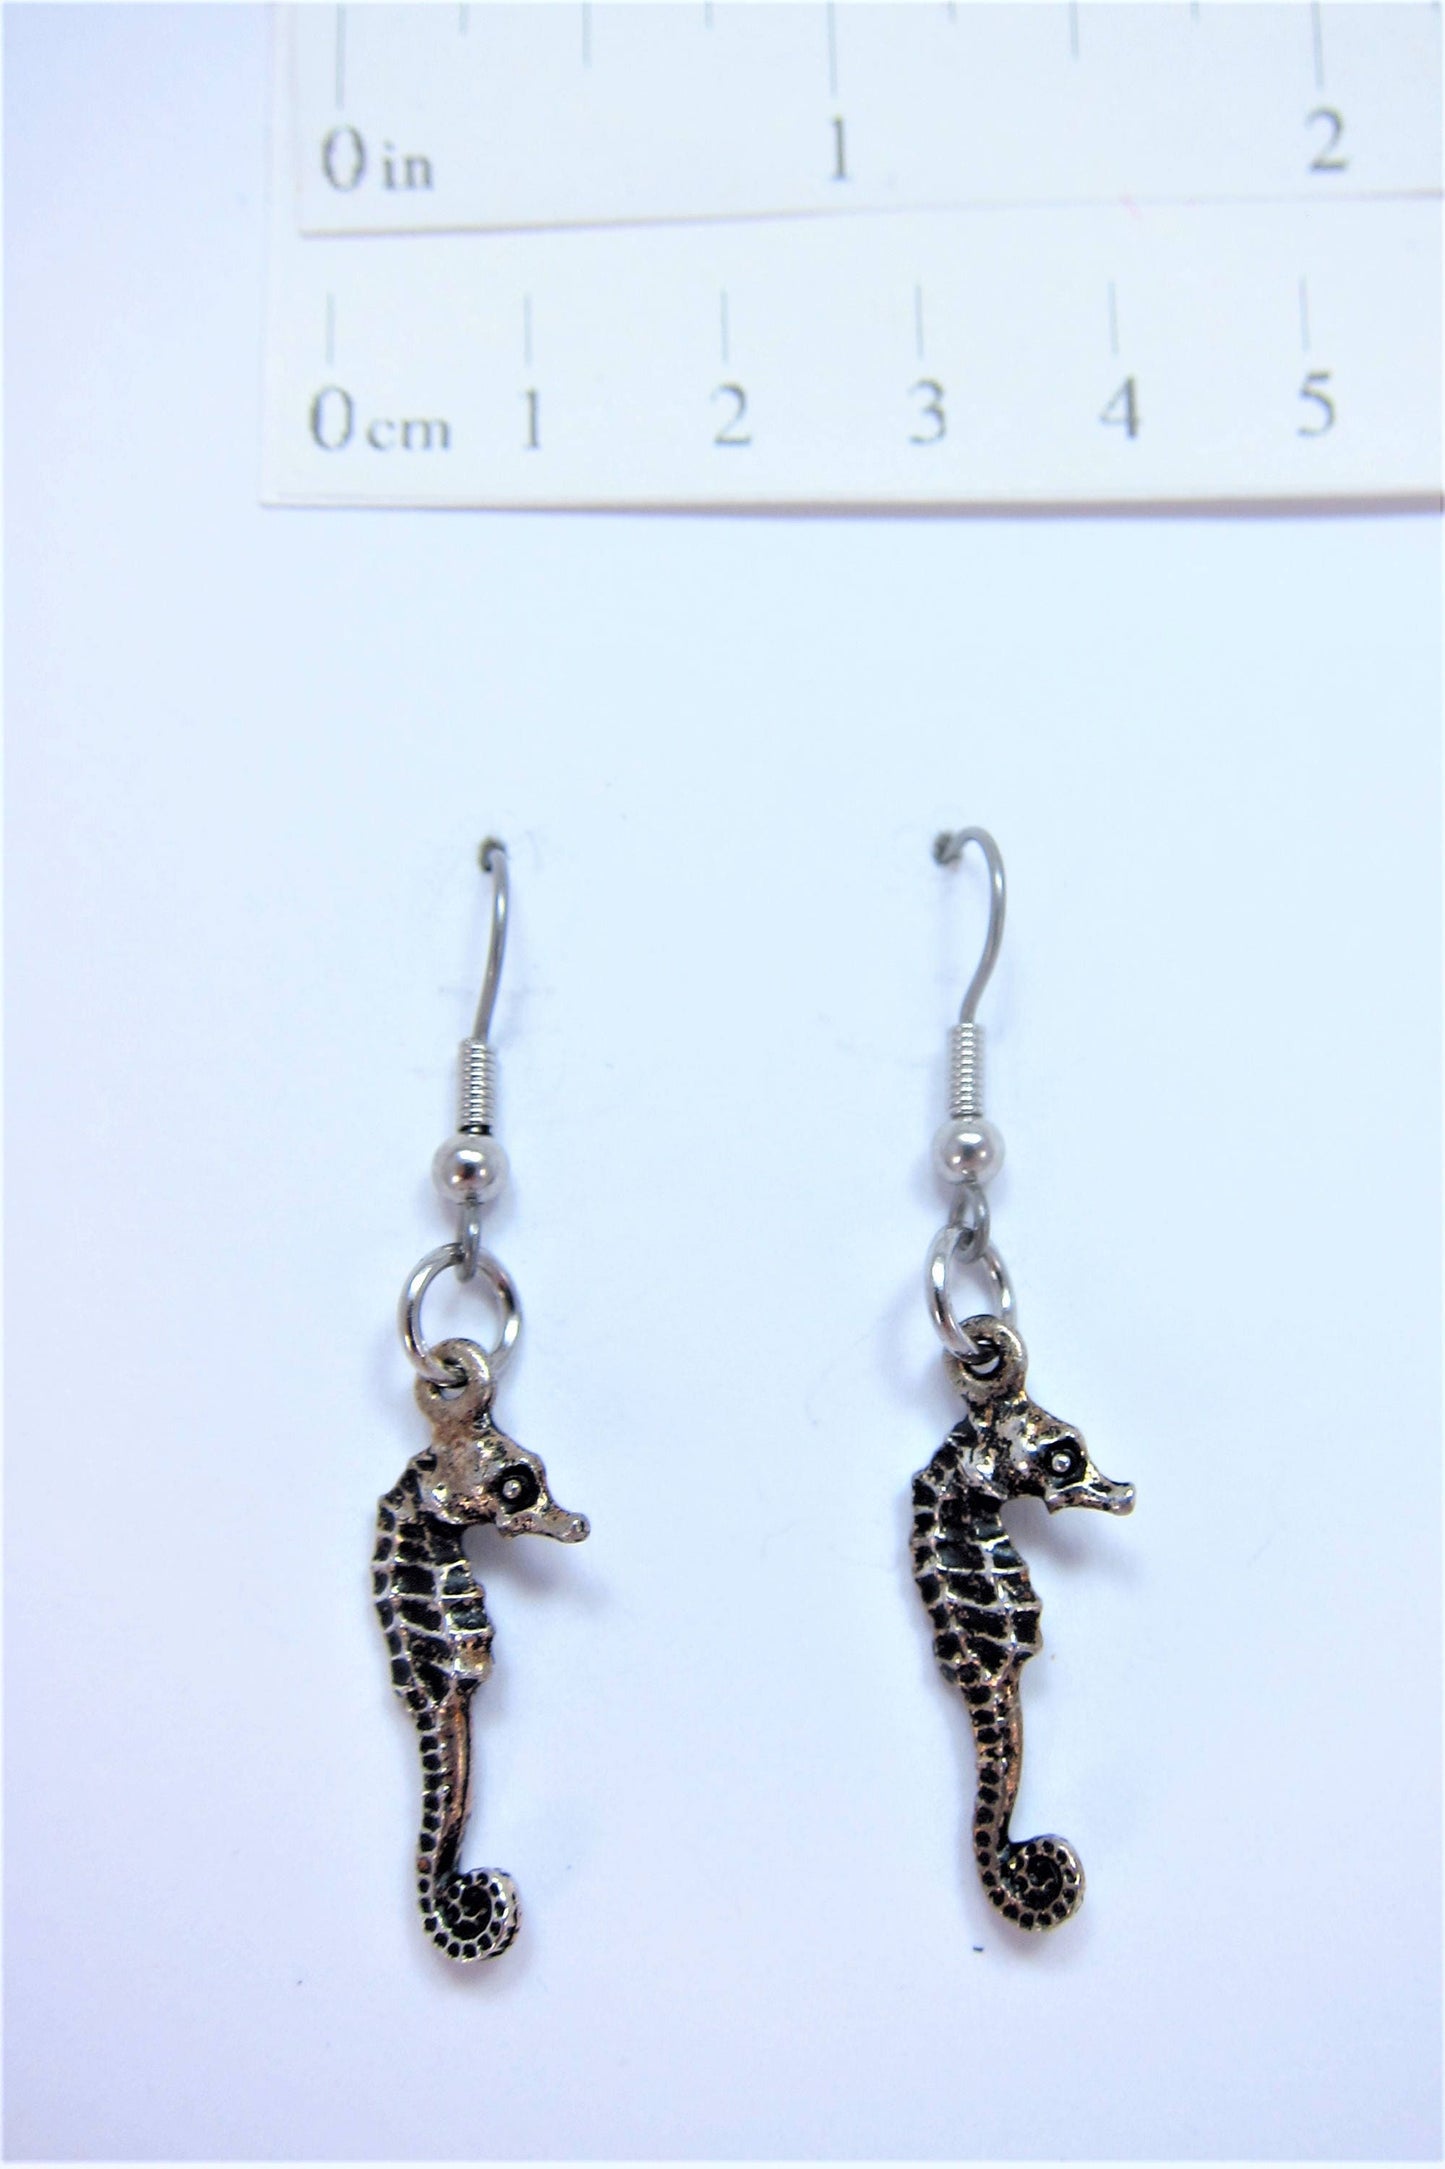 Charmed! Sea horse earrings silver plate antique finish on hypoallergenic surgical steel hooks